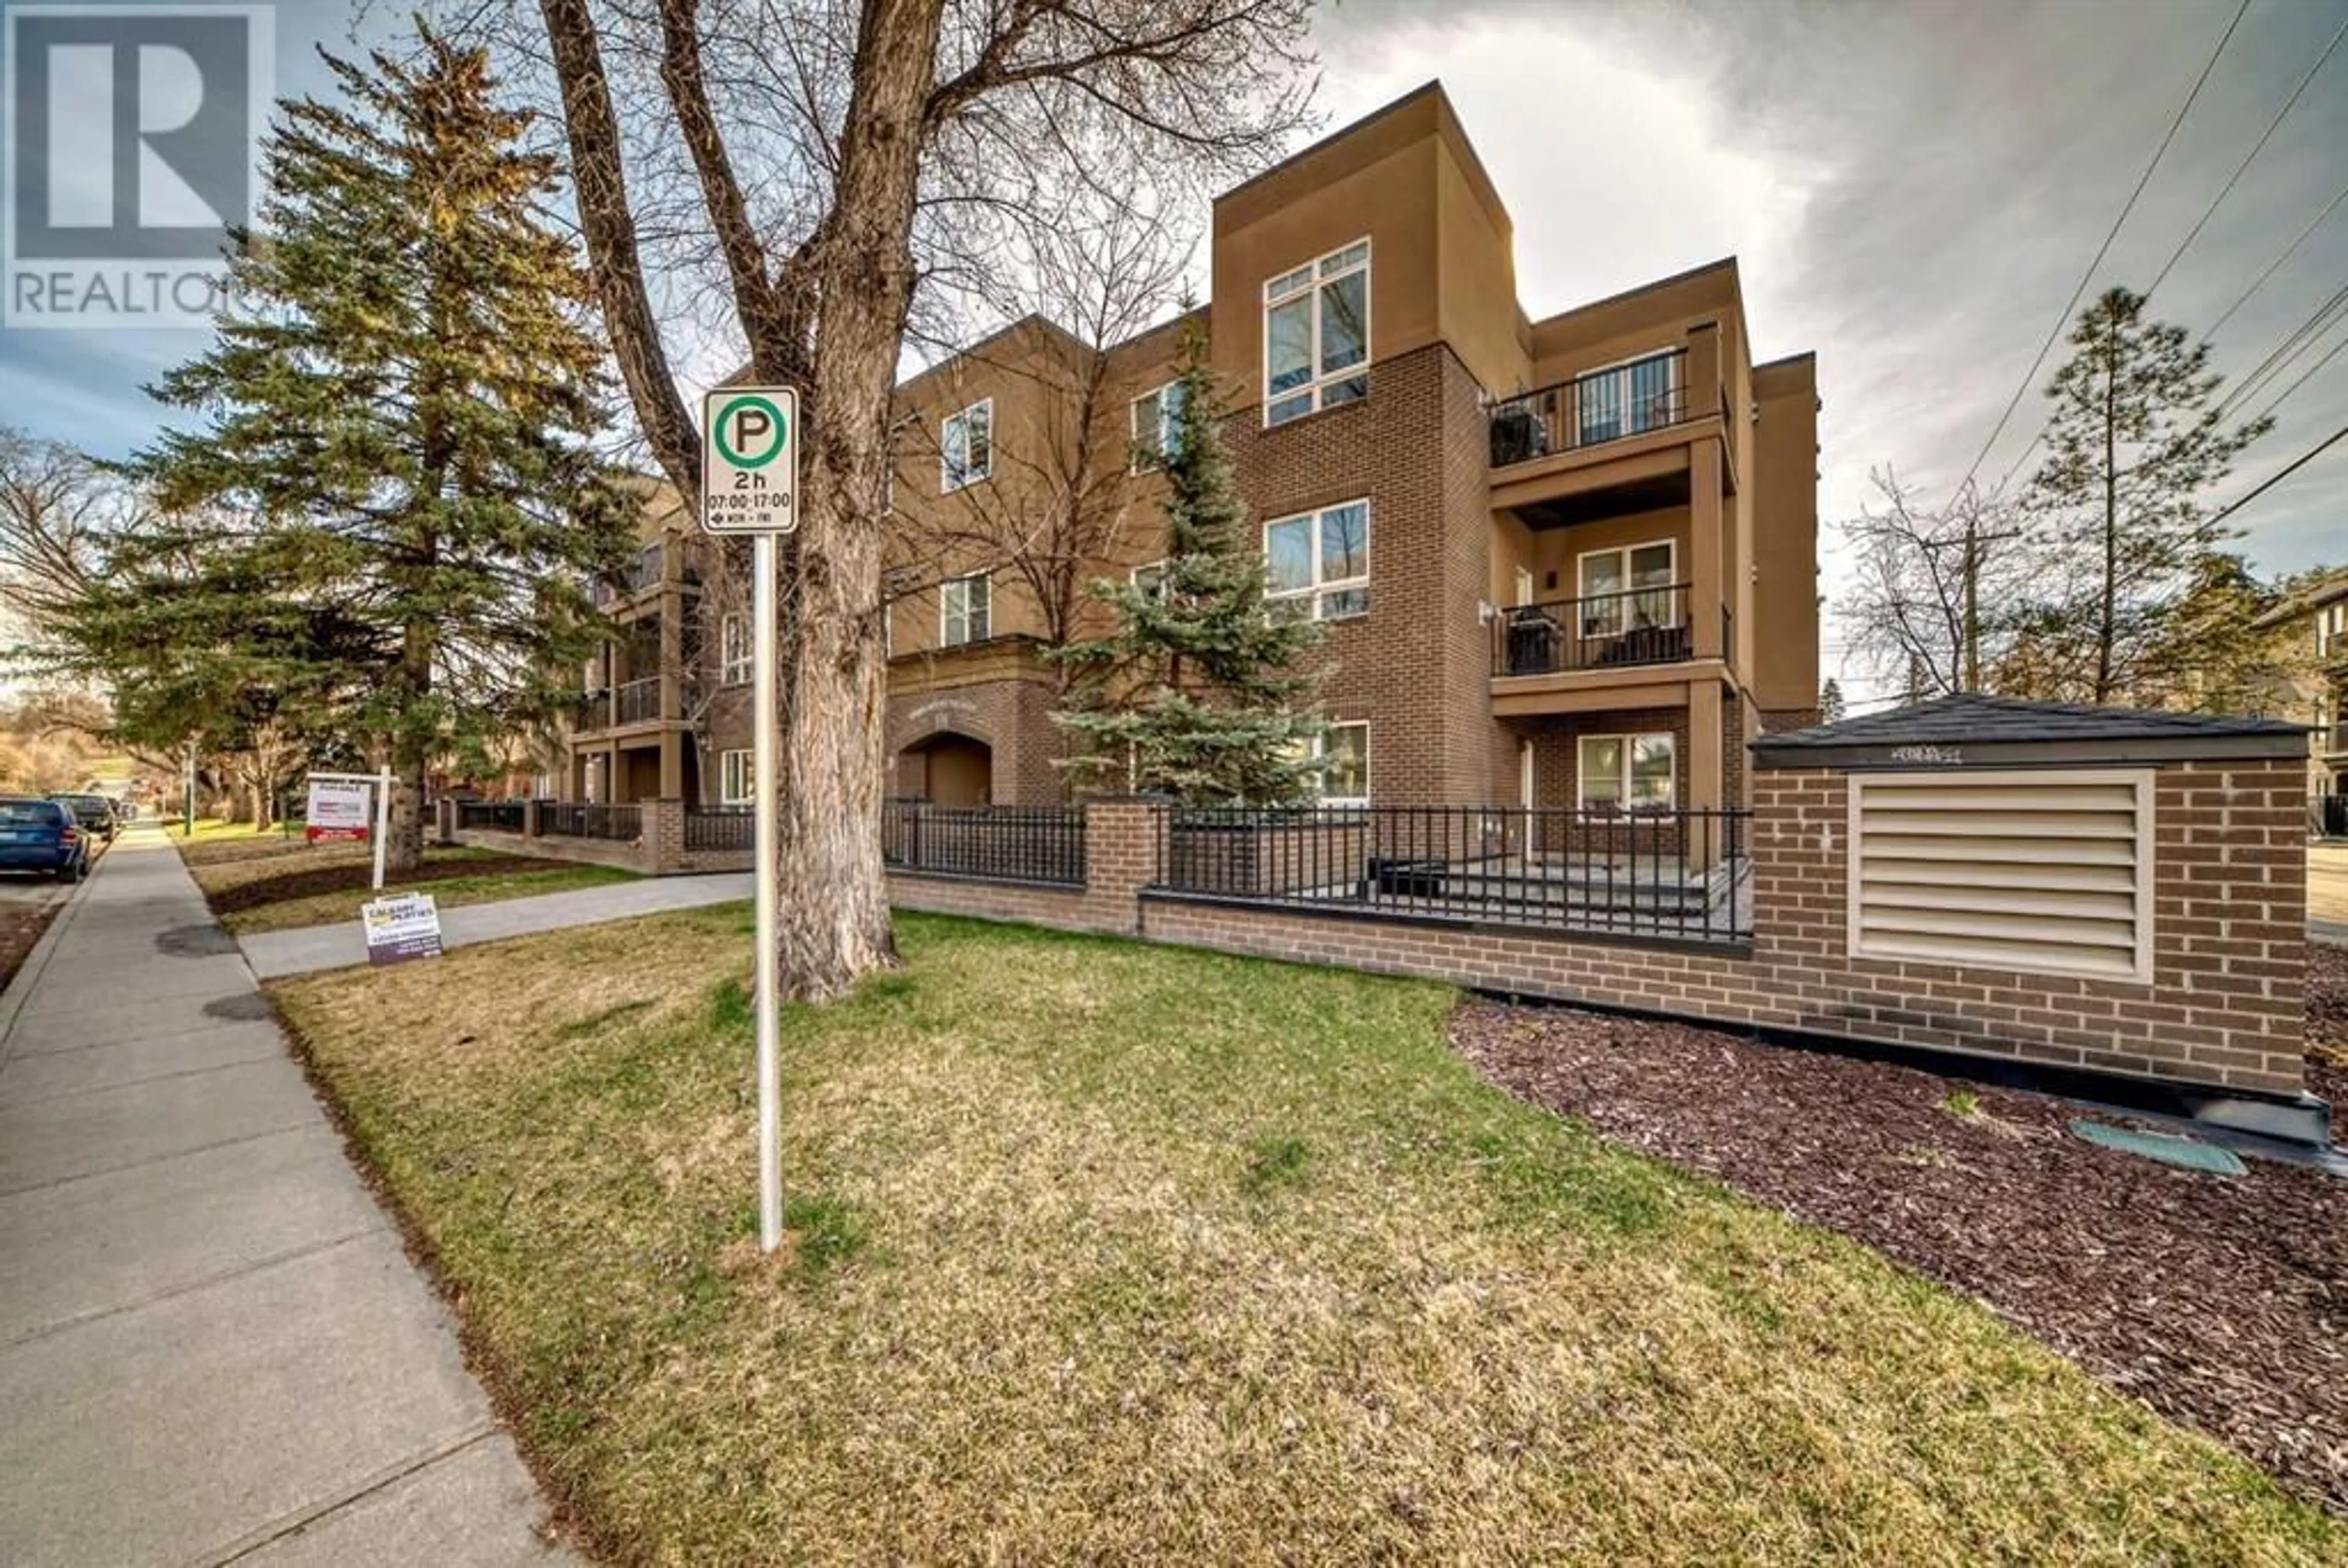 A pic from exterior of the house or condo for 308 518 33 Street NW, Calgary Alberta T2N2W4